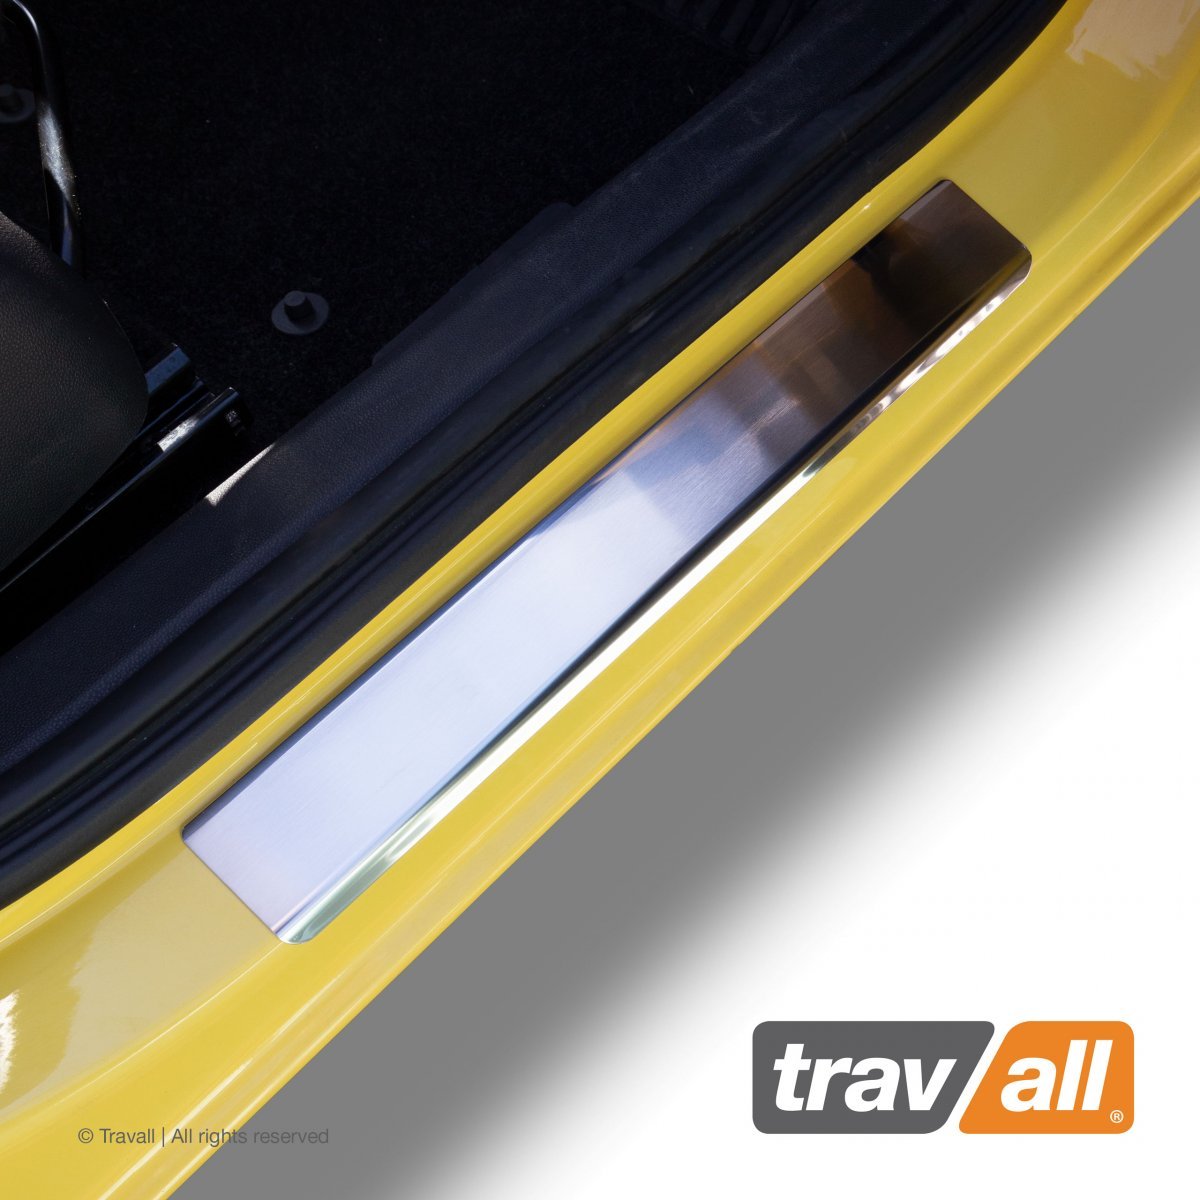 Travall Sillguards for Vauxhall Corsa (2006-2019)